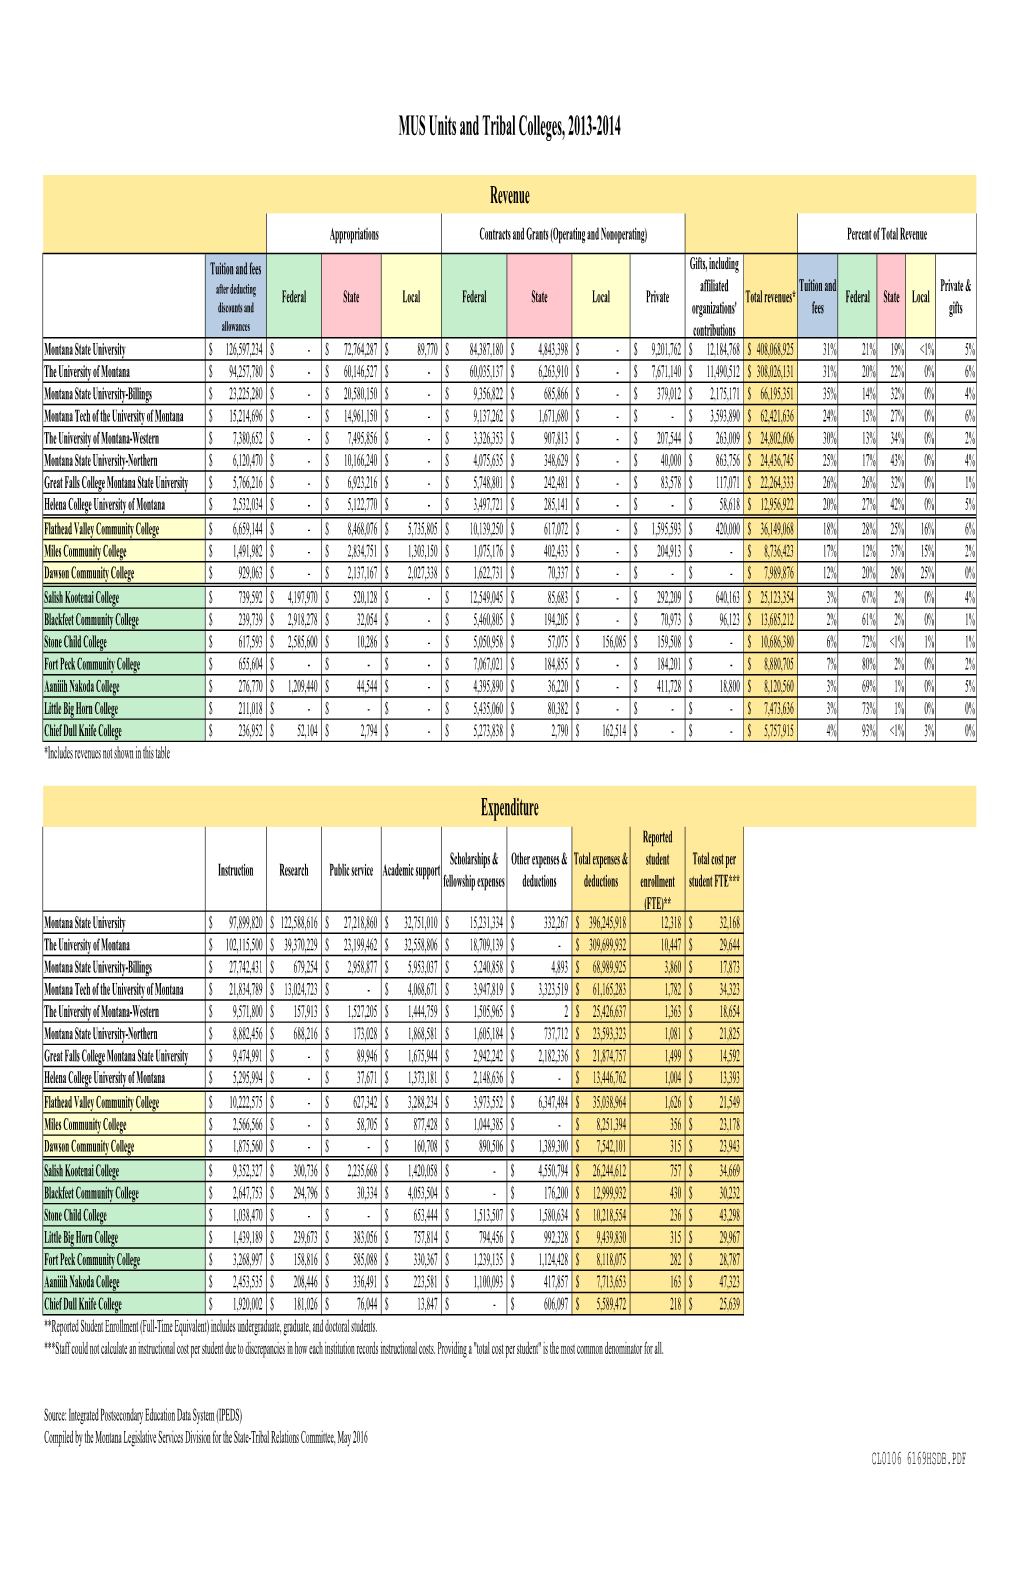 MUS Units and Tribal Colleges, 2013-2014